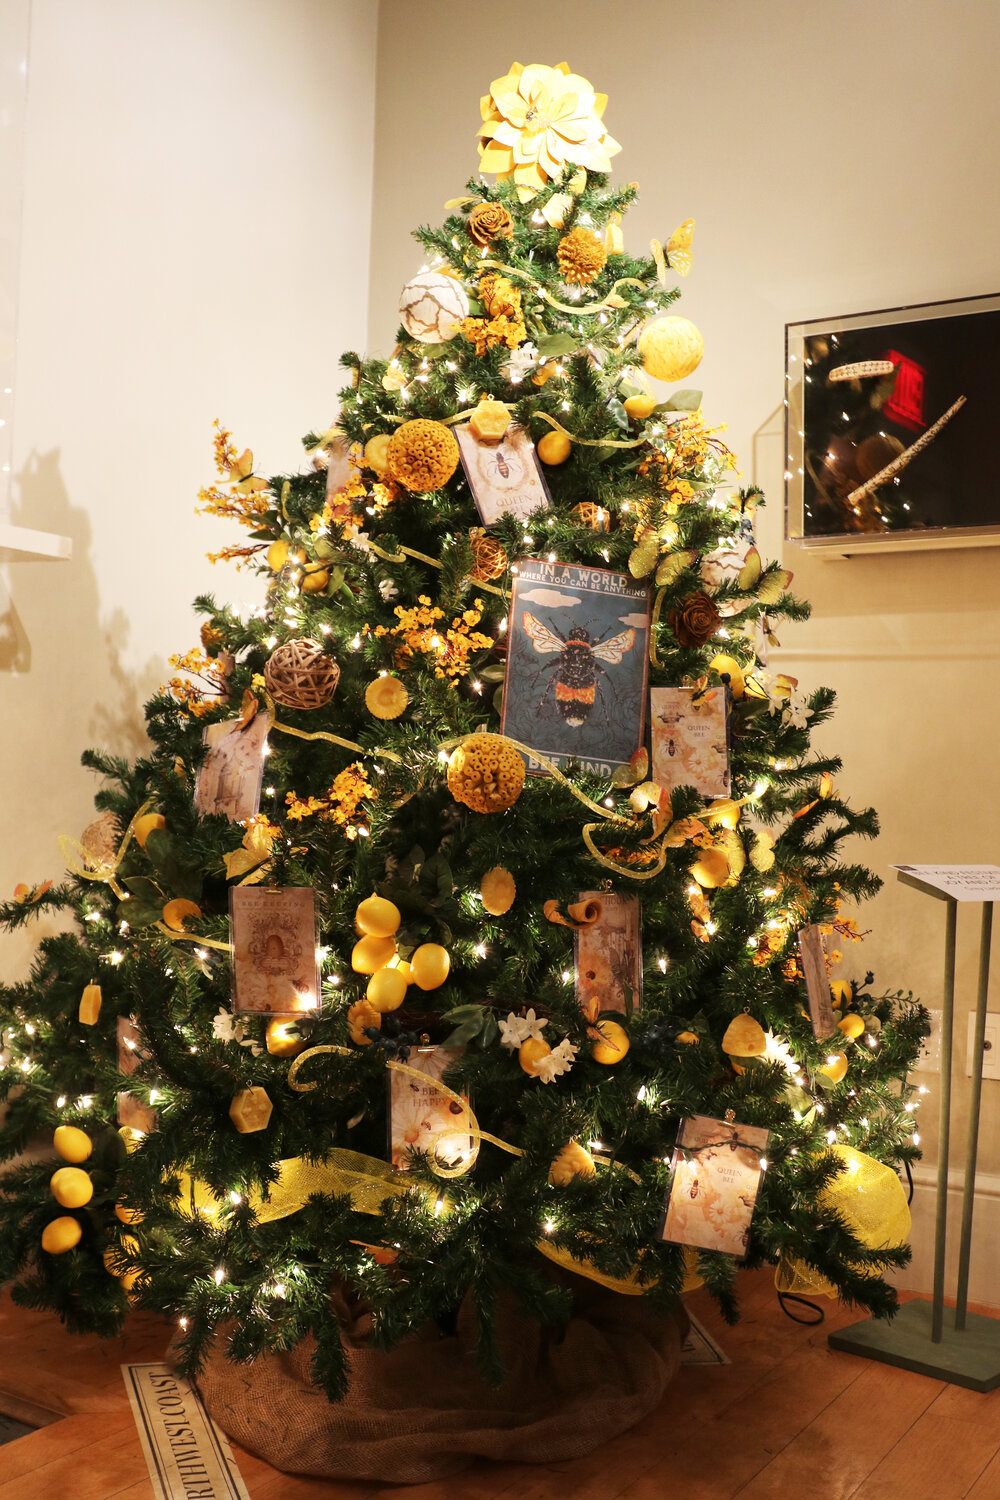 The Nantucket Historical Association’s annual Festival of Trees includes more than 75 trees decorated by businesses, community groups and residents on display at the Broad Street Whaling Museum.